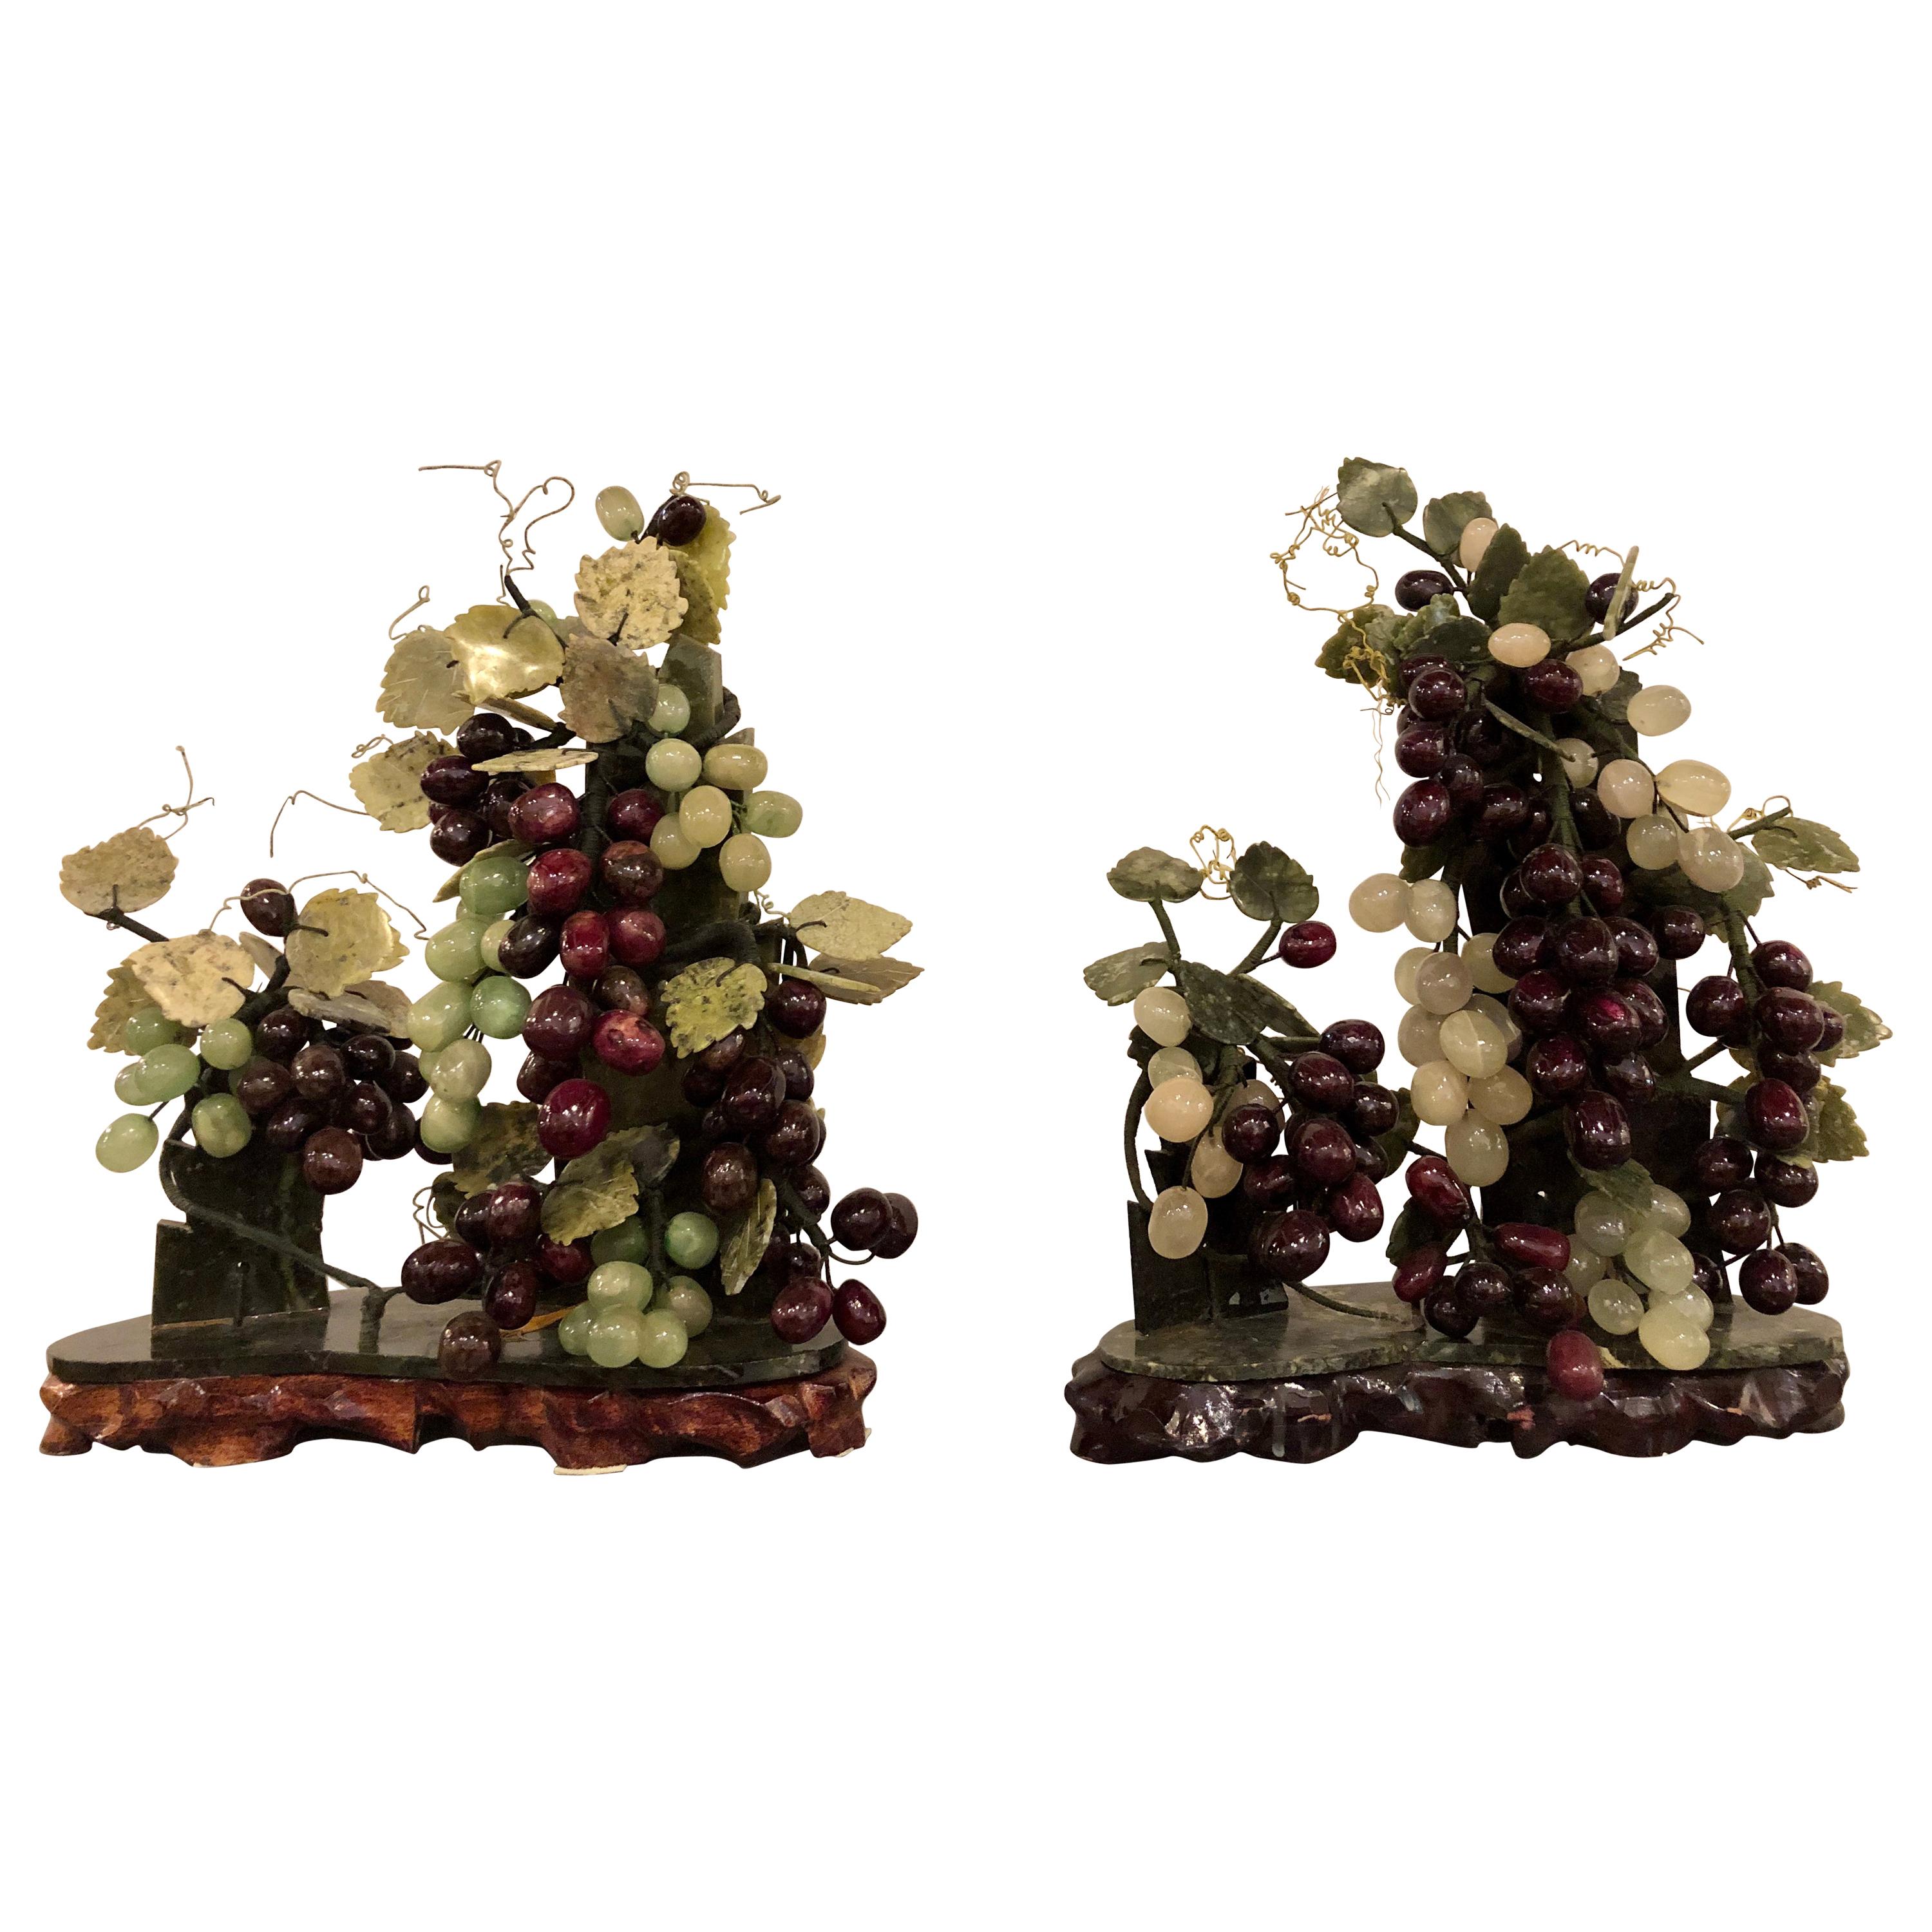 Pair of Jade and Amethyst Colored Hard Stone And Glass Group of Grapes Tableware